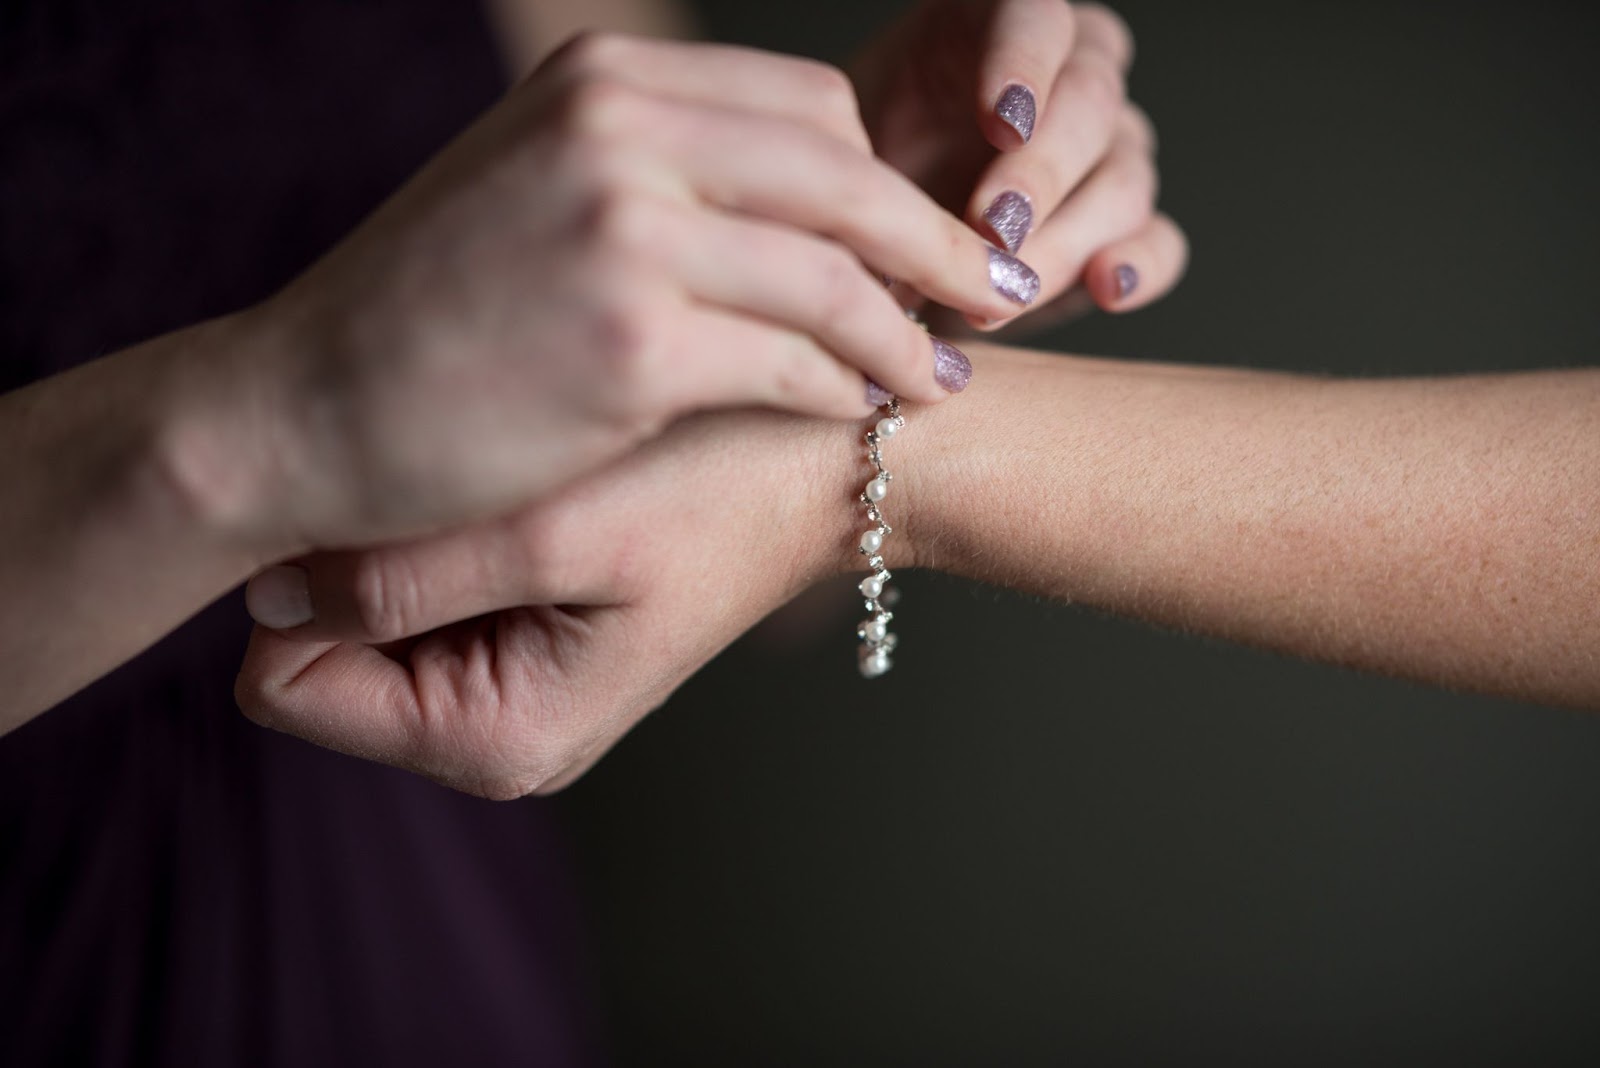 A bridesmaid wearing a plum formal dress fastens a latch on a pearl bracelet for the bride